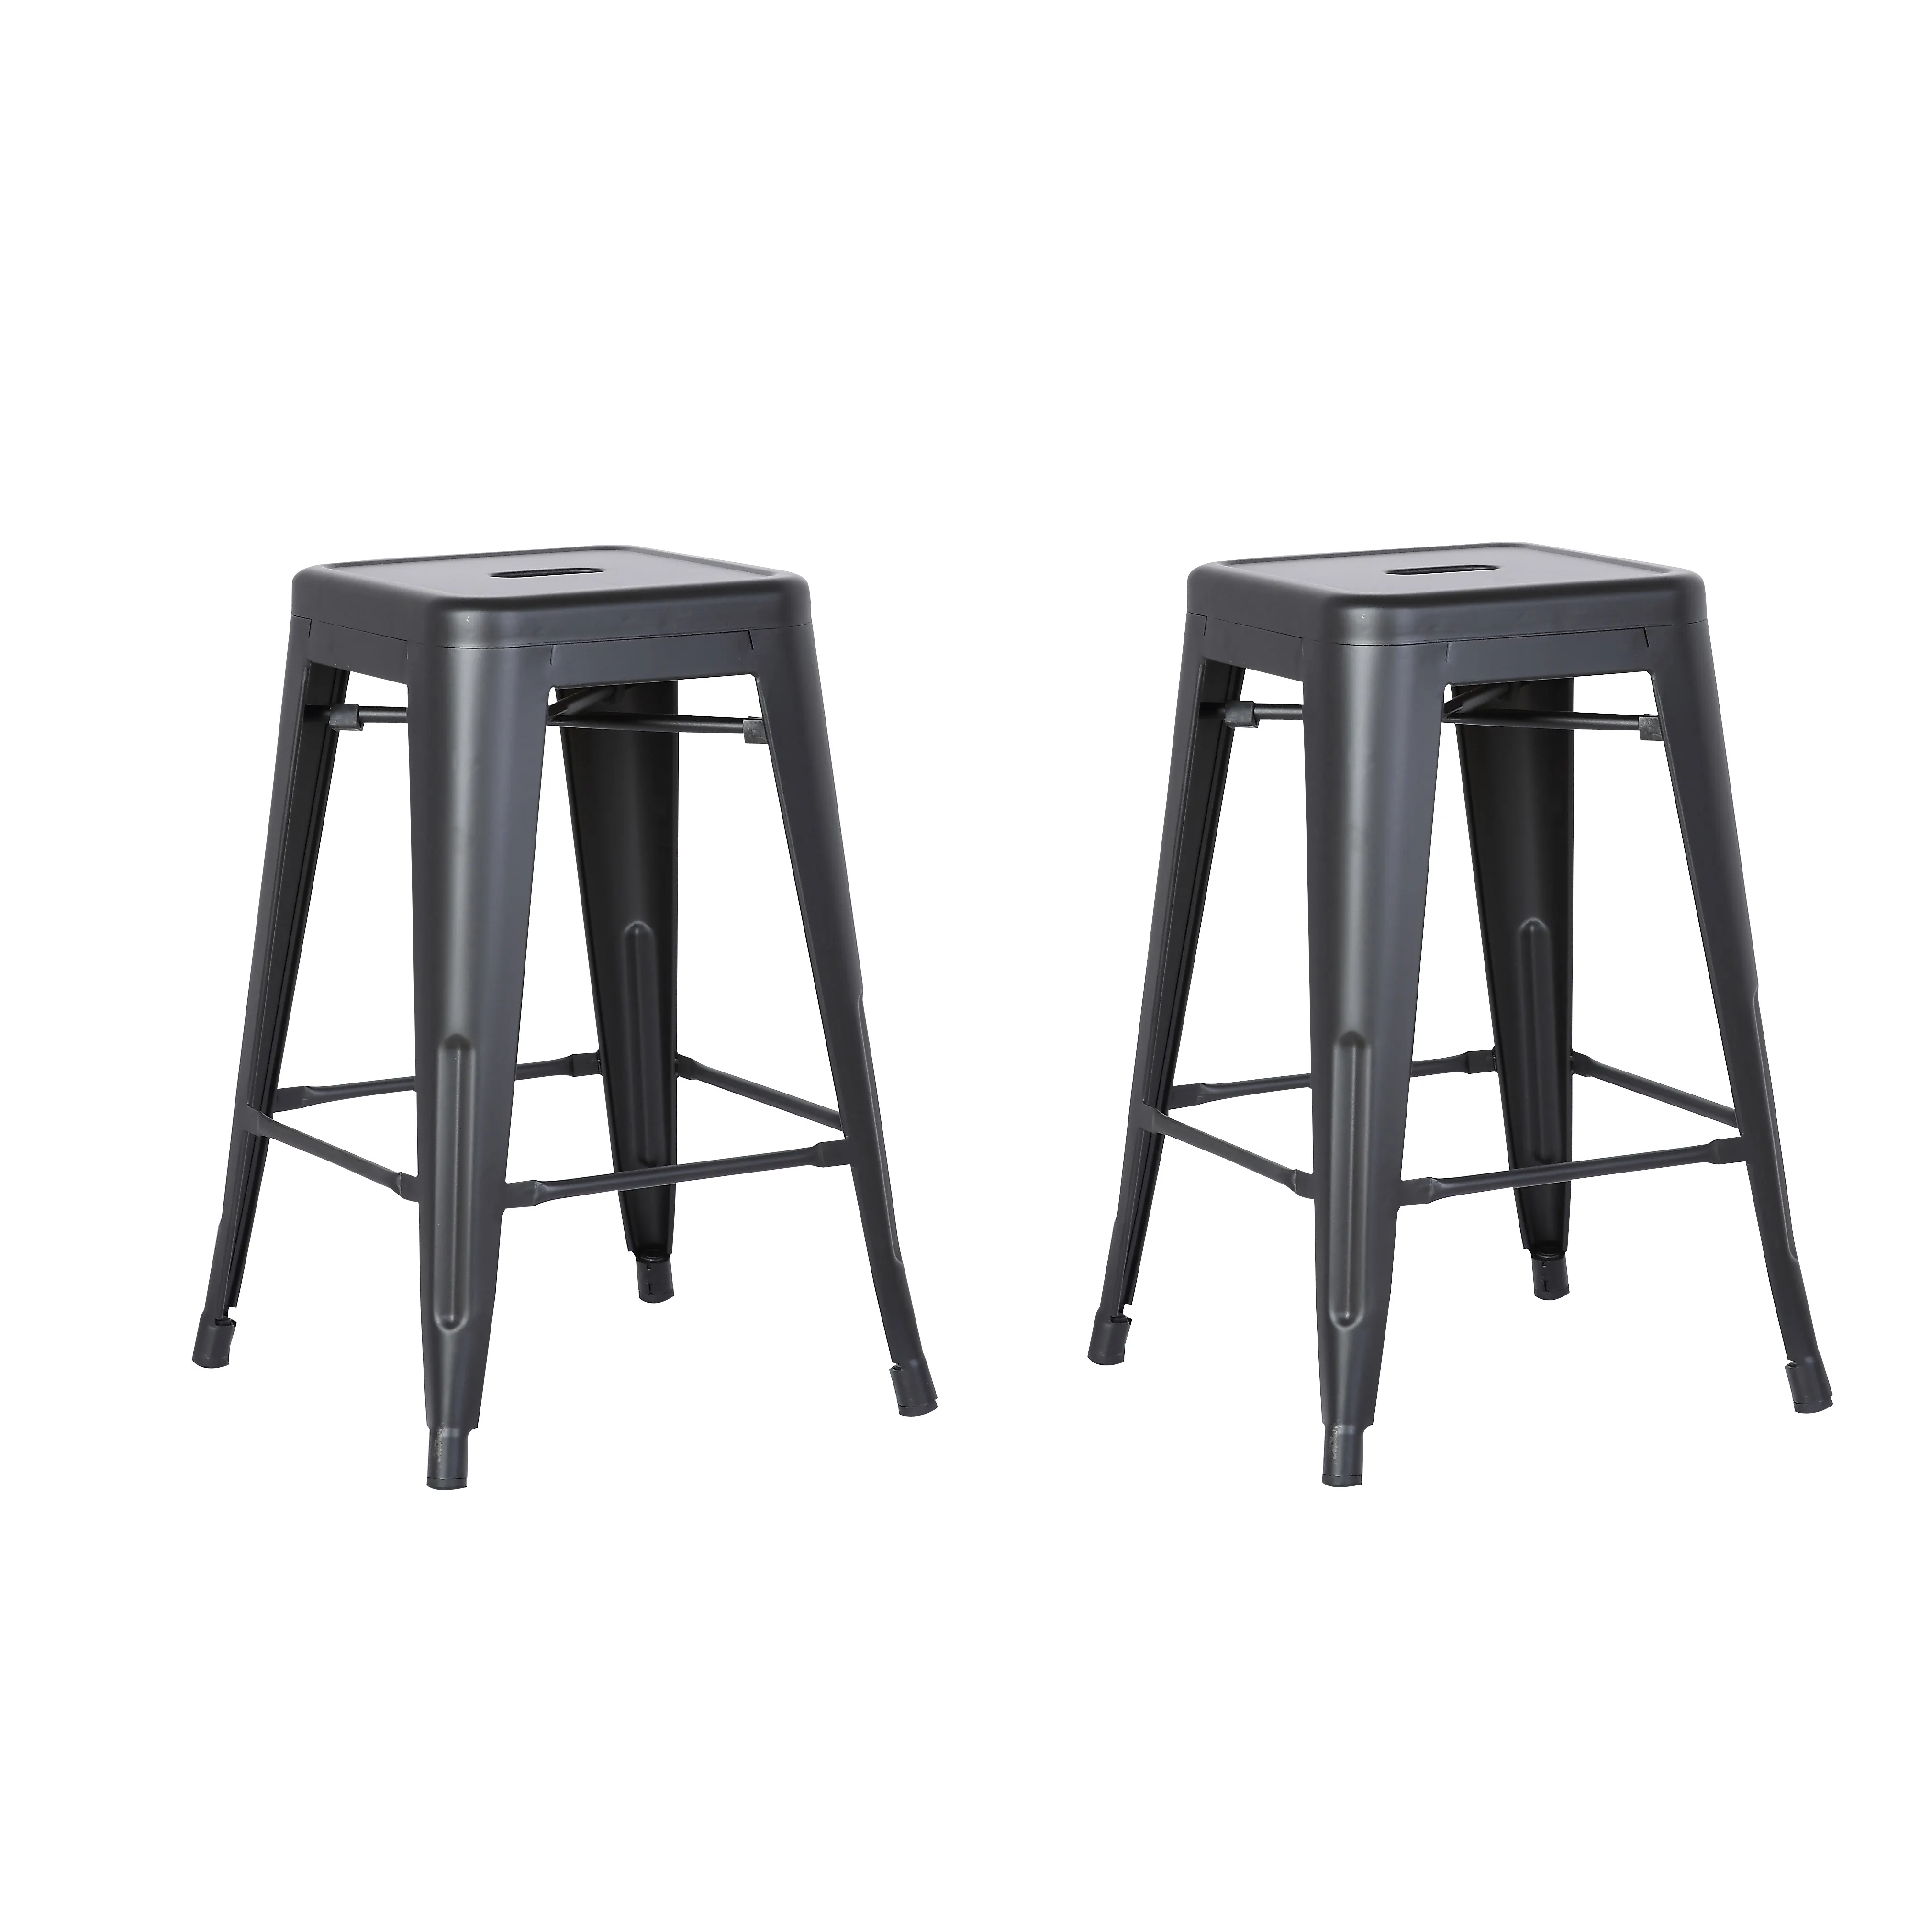 Hot Sale Best Price Quality Modern Cheap Counter Bar Stool Chair